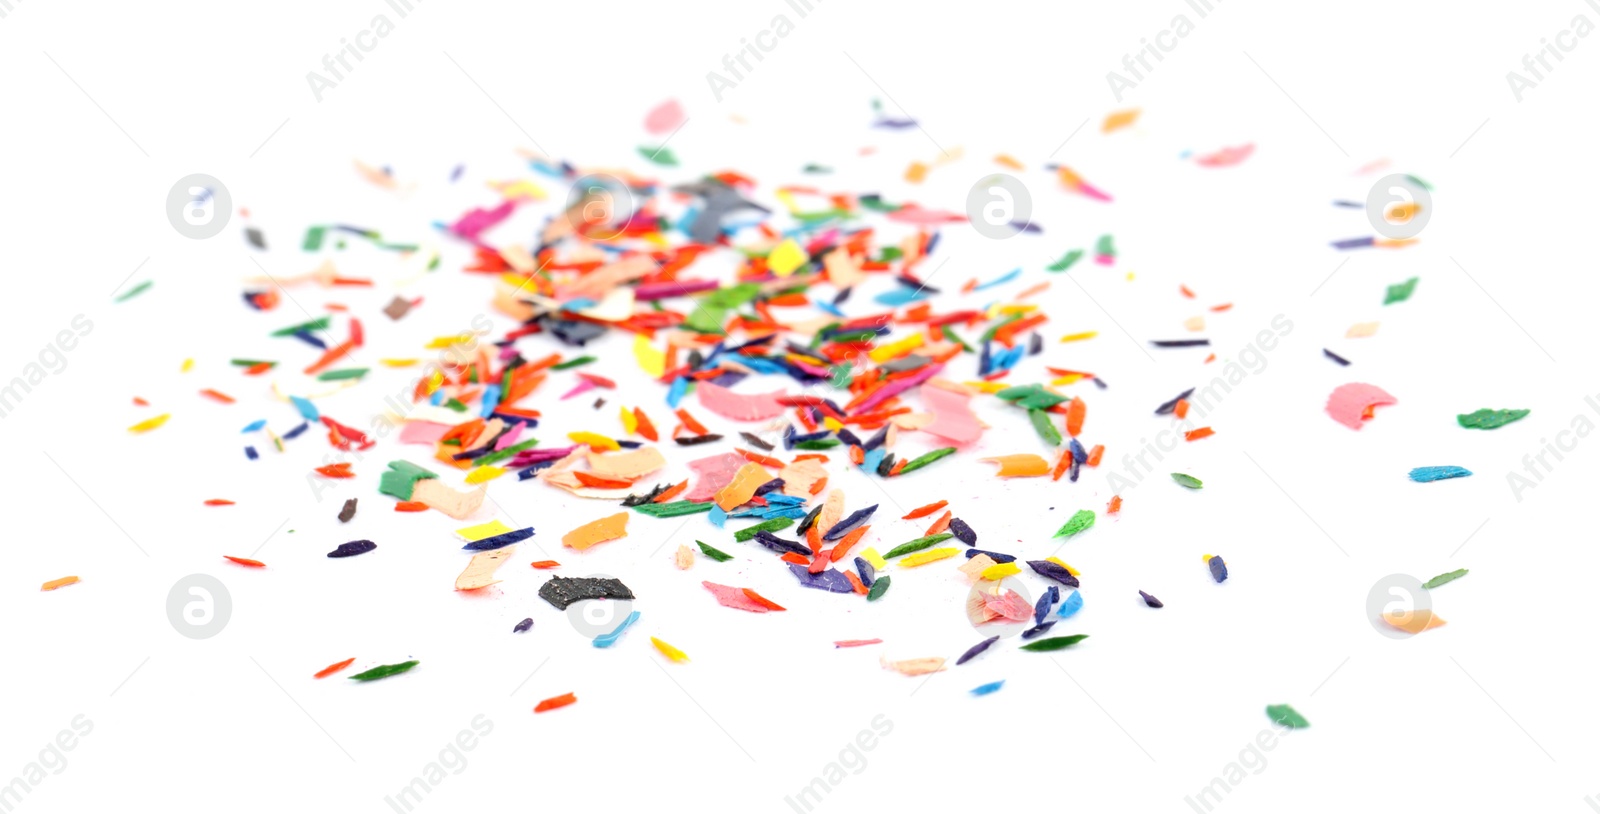 Photo of Colorful graphite crumbs on white background. Pencil sharpening